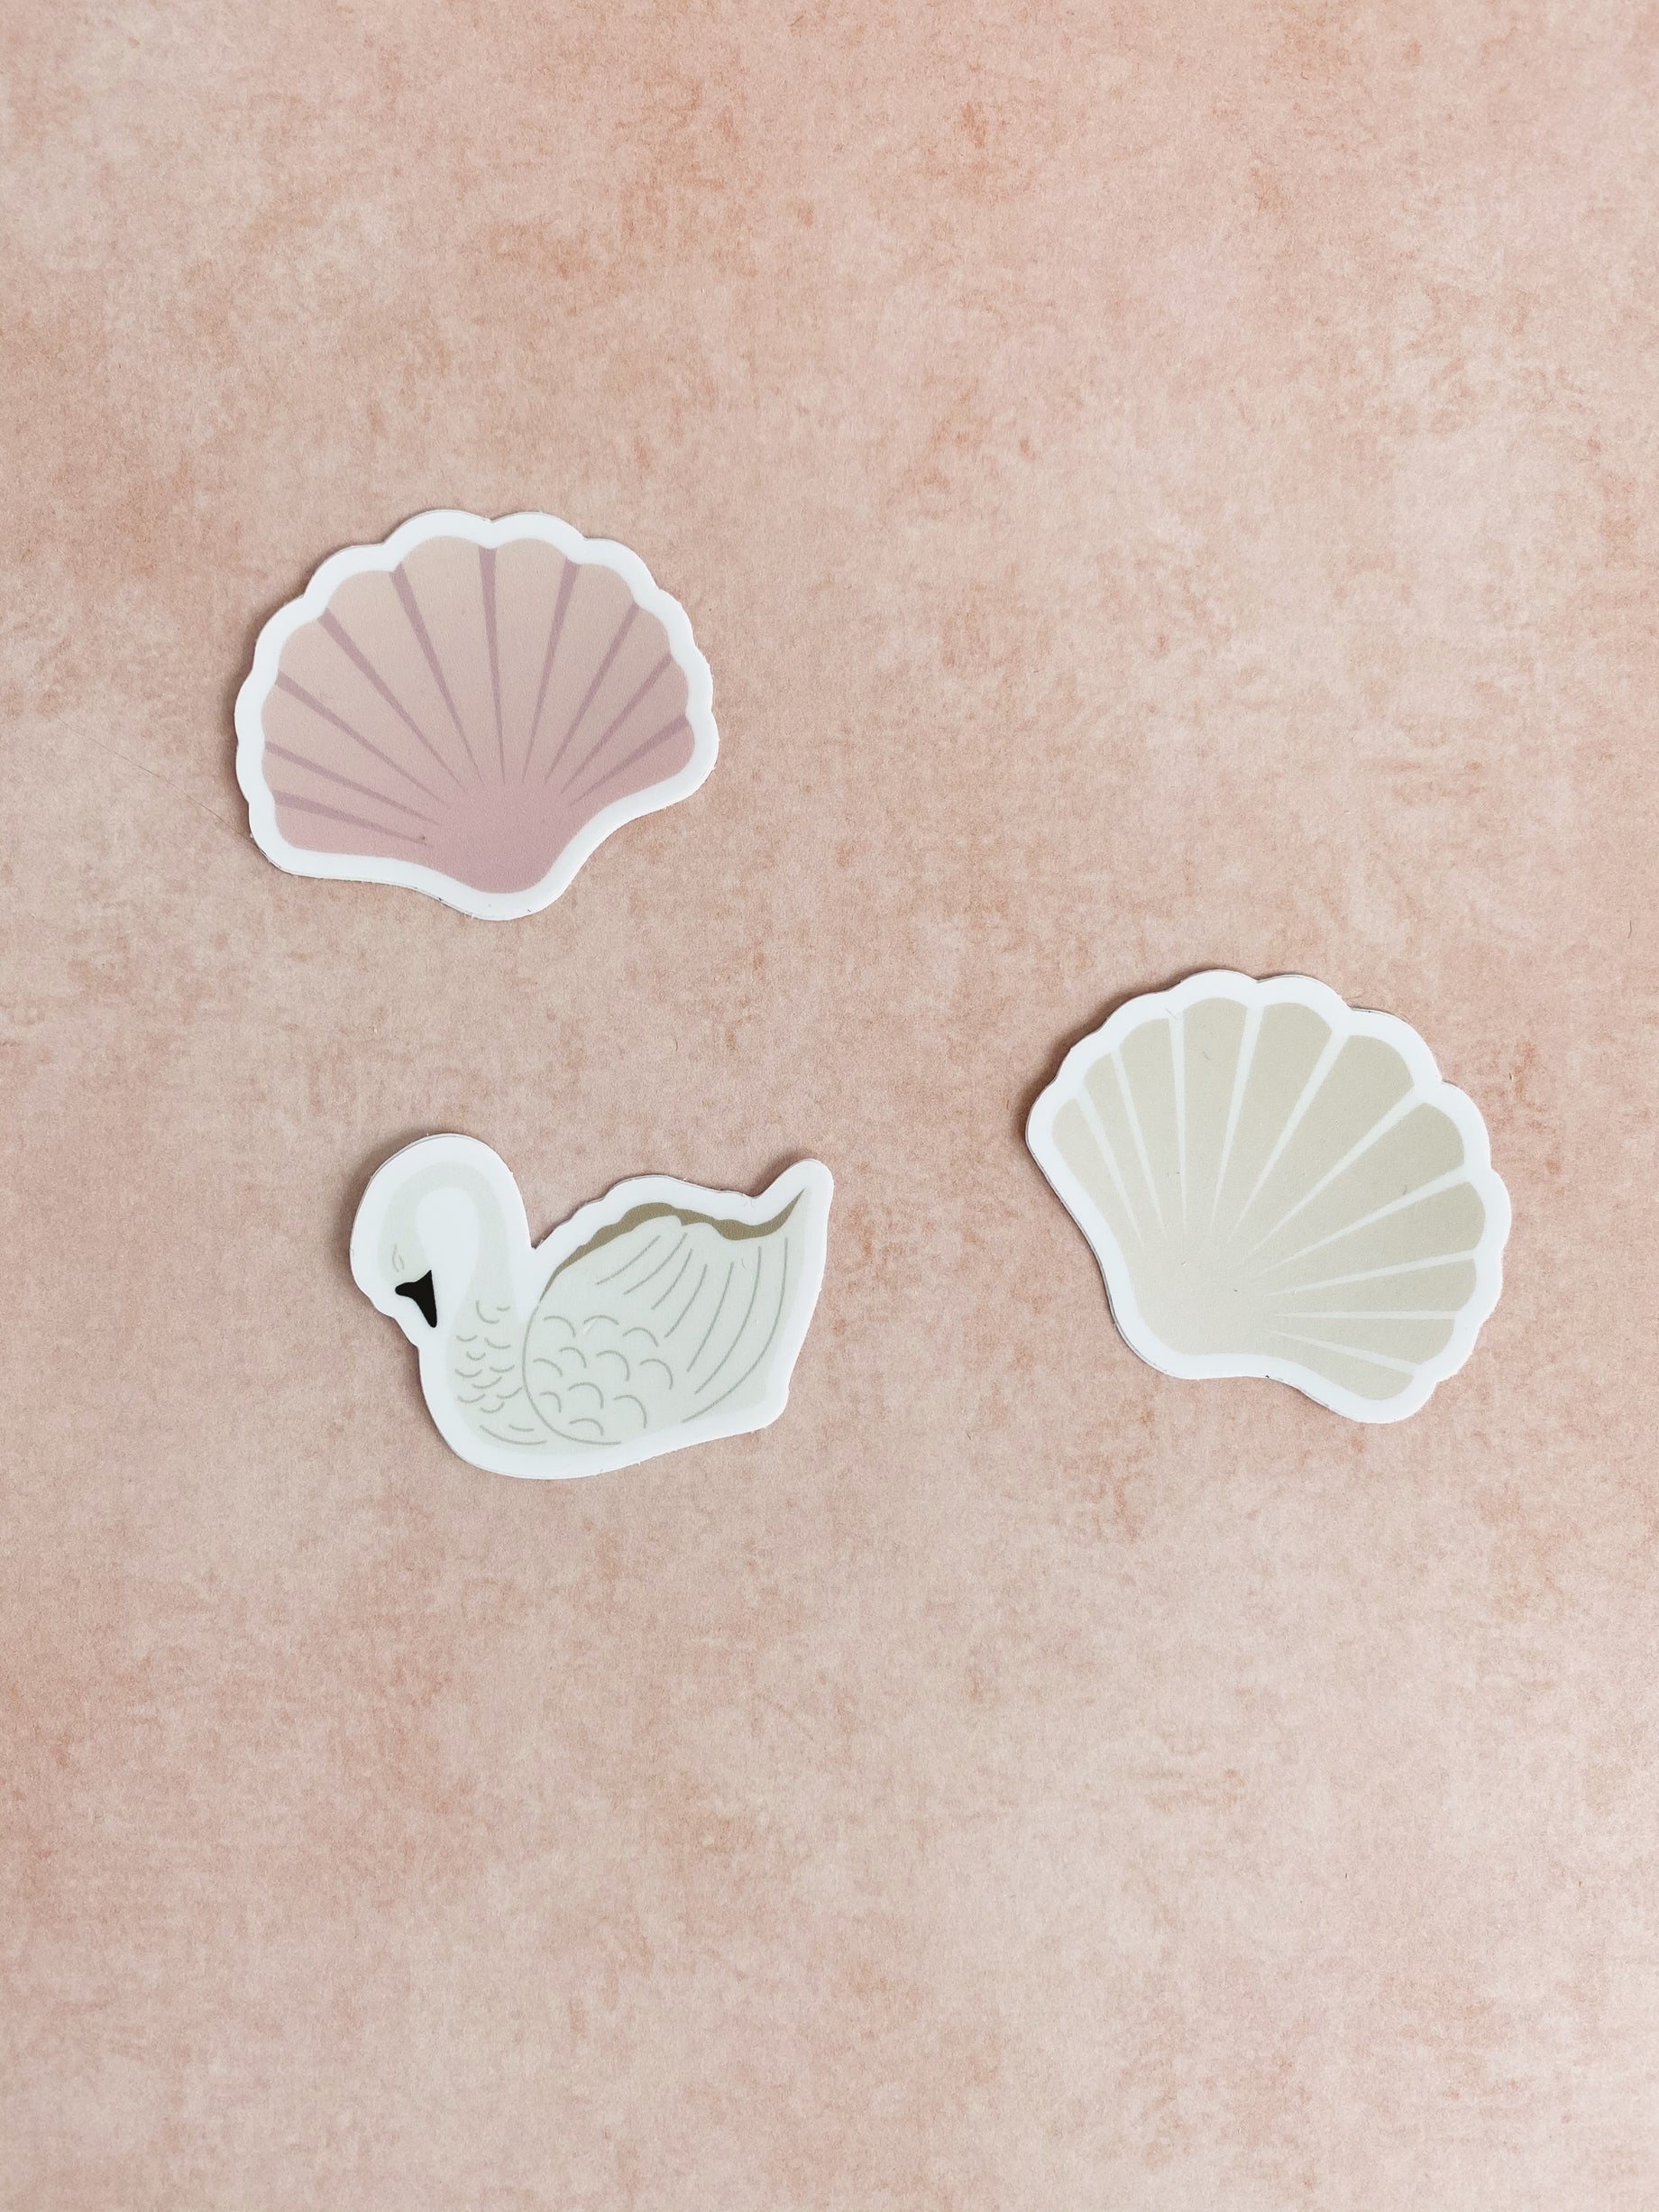 Swan and Shell Sticker Pack